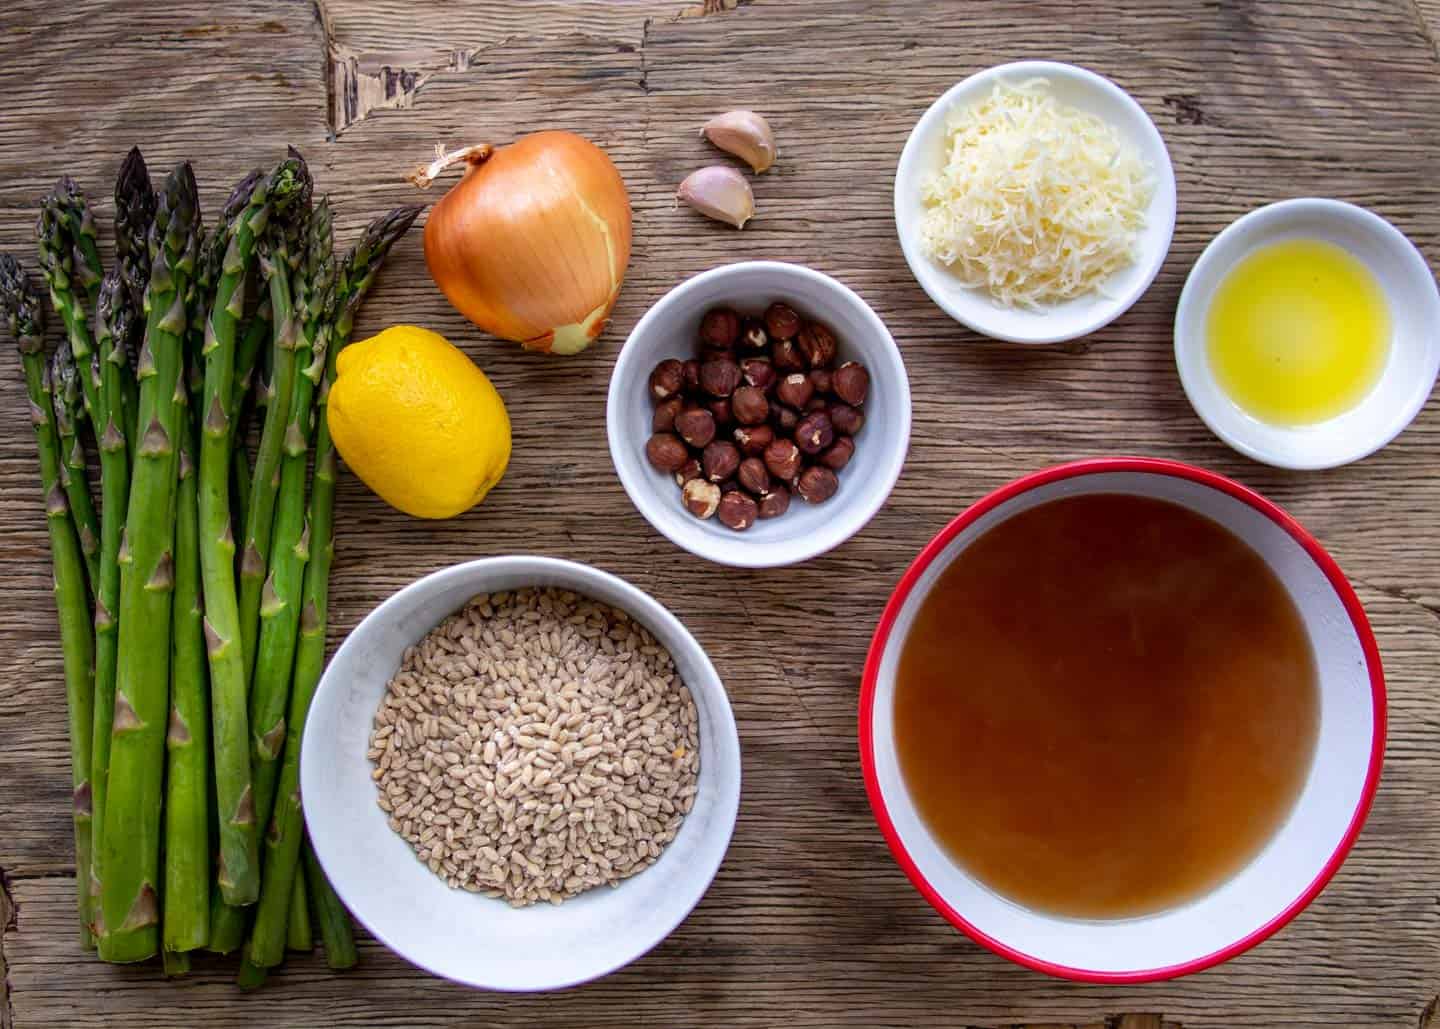 Ingredients for Asparagus Risotto